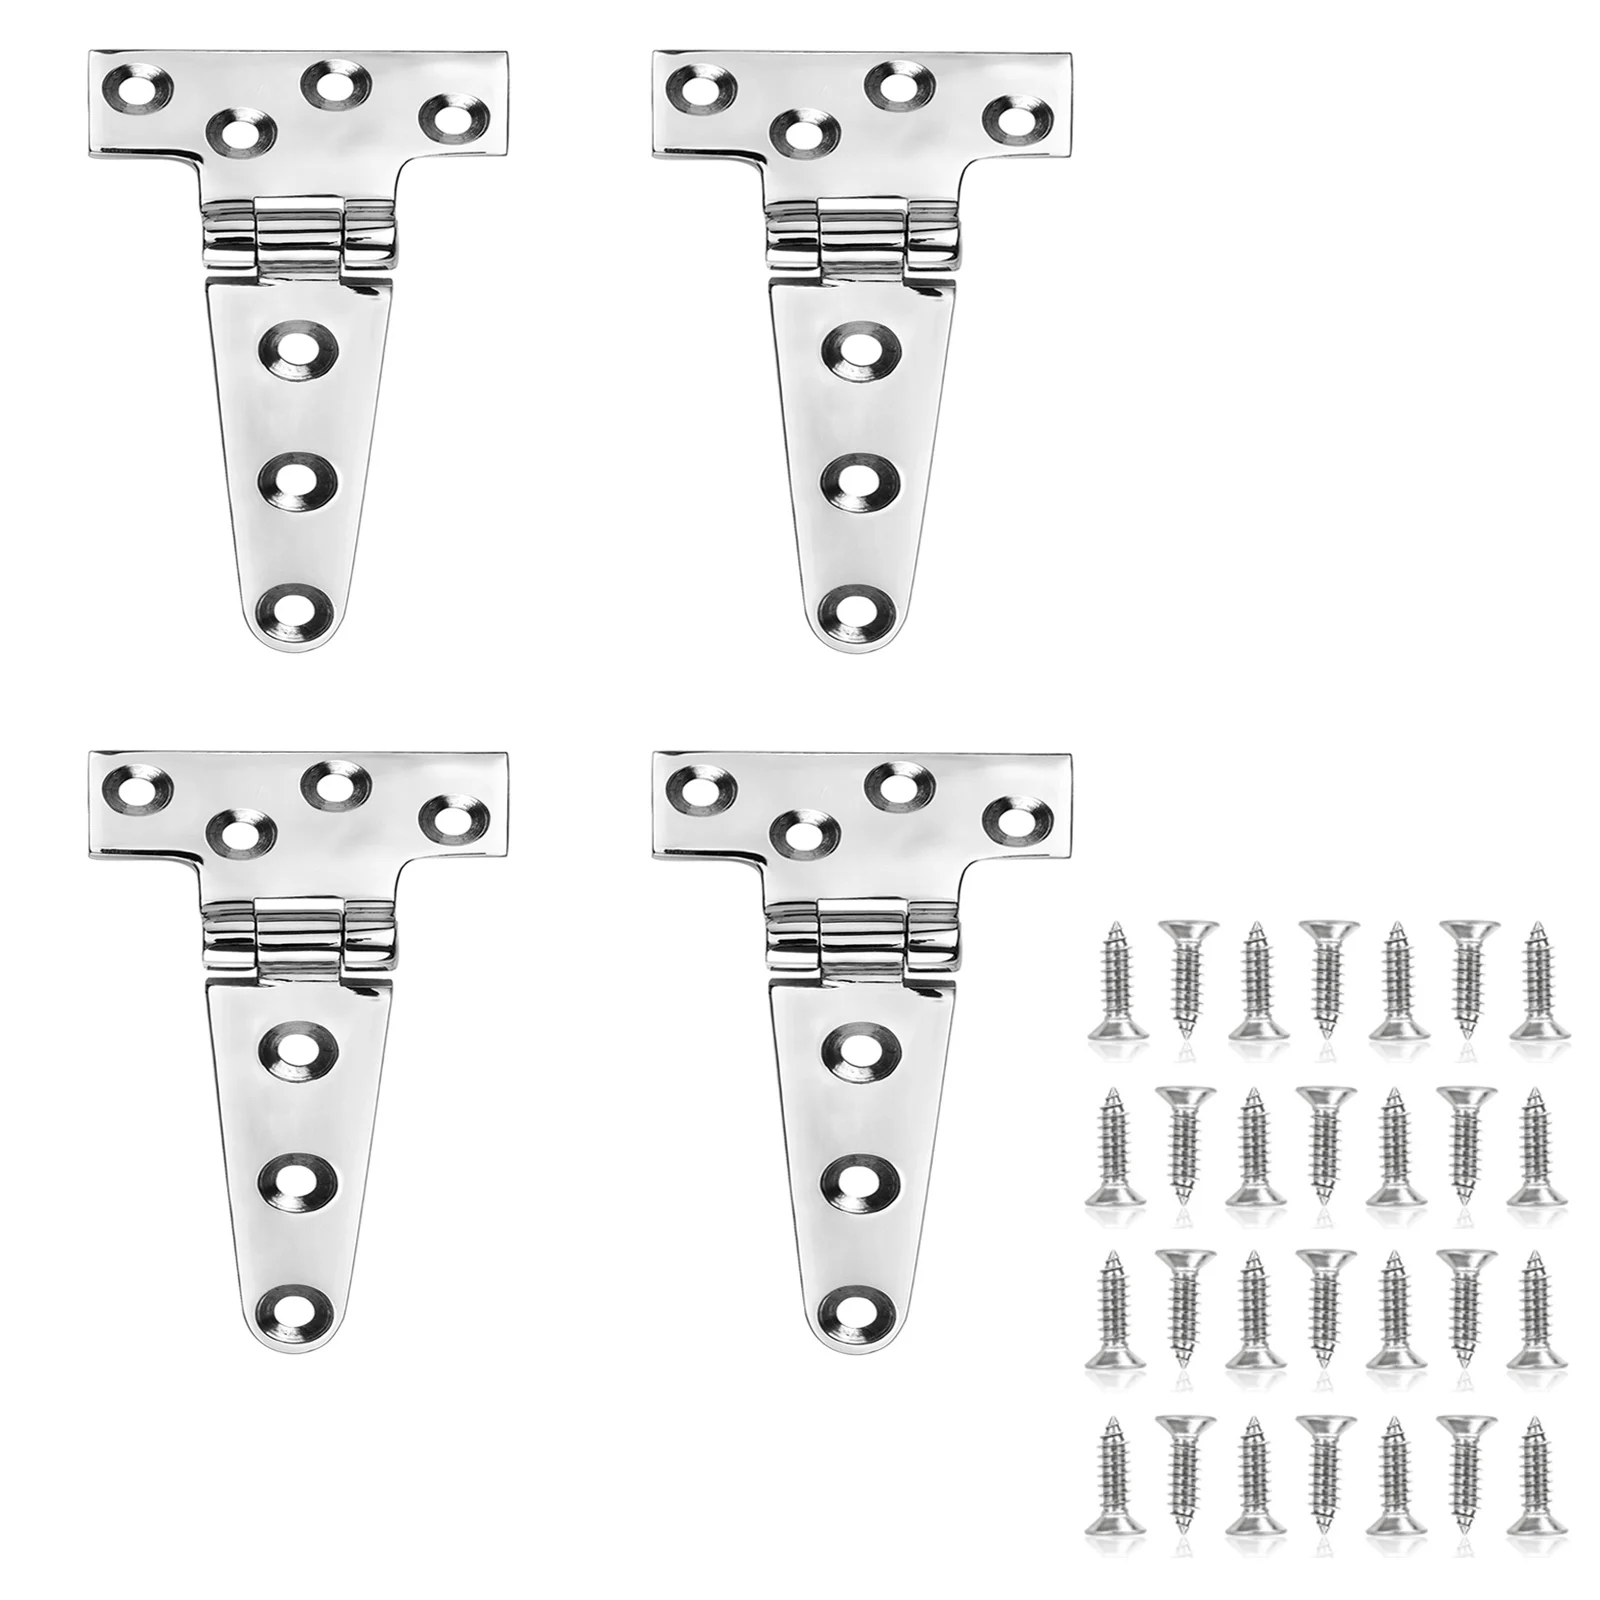 Boat Hinges Stainless Steel Marine Grade，5.95 X 2.95 Inches,, Heavy Duty 316 SS with Screws (4 PCS) 4x metal locking folding table chair leg brackets spring cabinet hinges cupboard door furniture hardware with screws no drilling